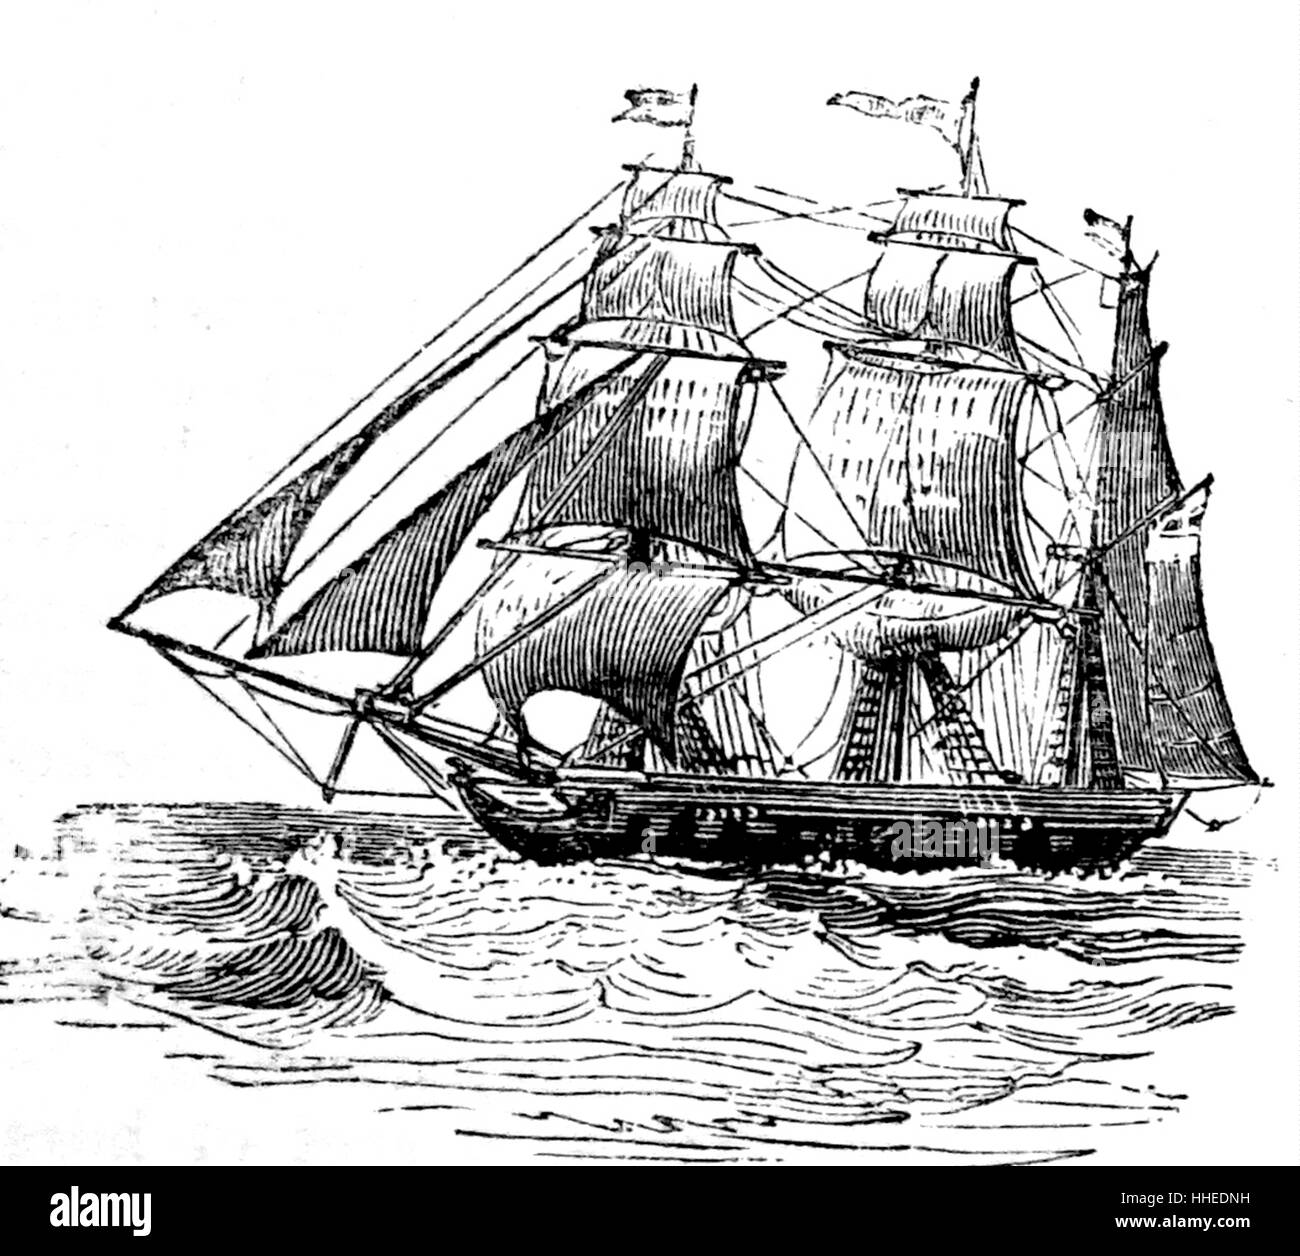 Engraving depicting a barque sailing vessel with three or more masts having the fore- and mainmasts rigged square and only the mizzen(the aftmost mast) rigged fore-and-aft. Dated 19th Century Stock Photo